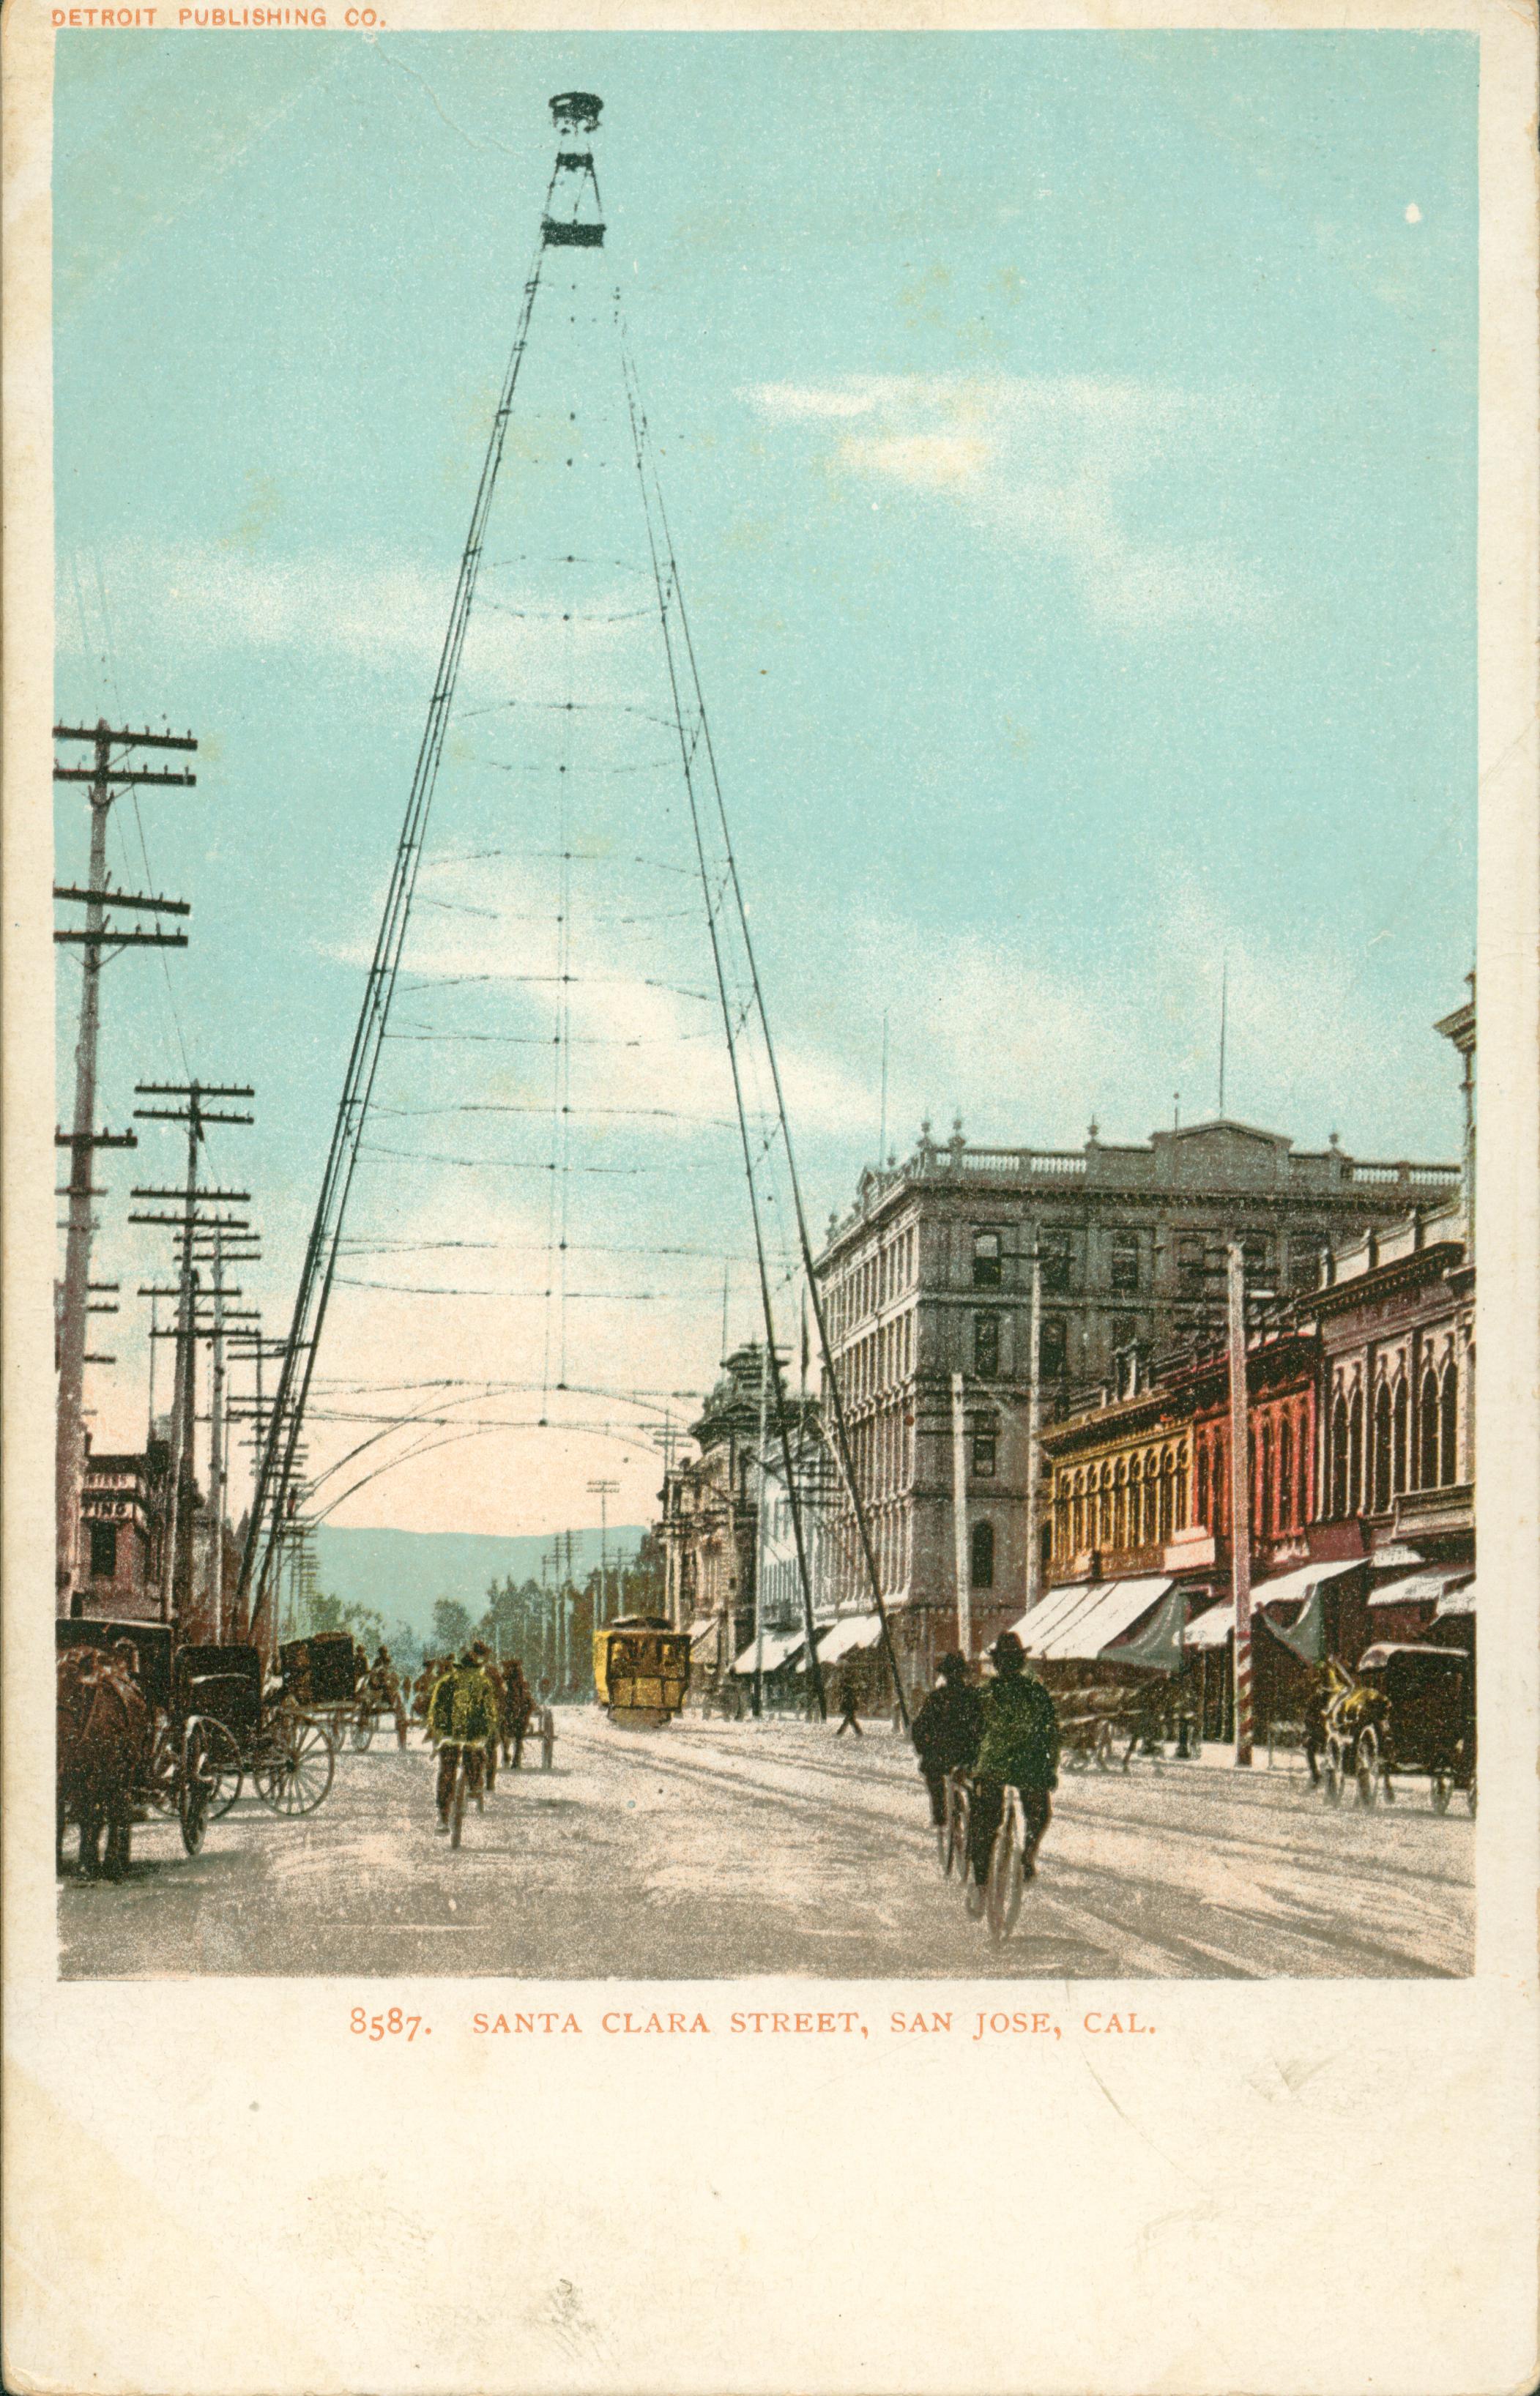 Shows a street scene in San Jose on Santa Clara Street with the 'Electric Tower' in the background